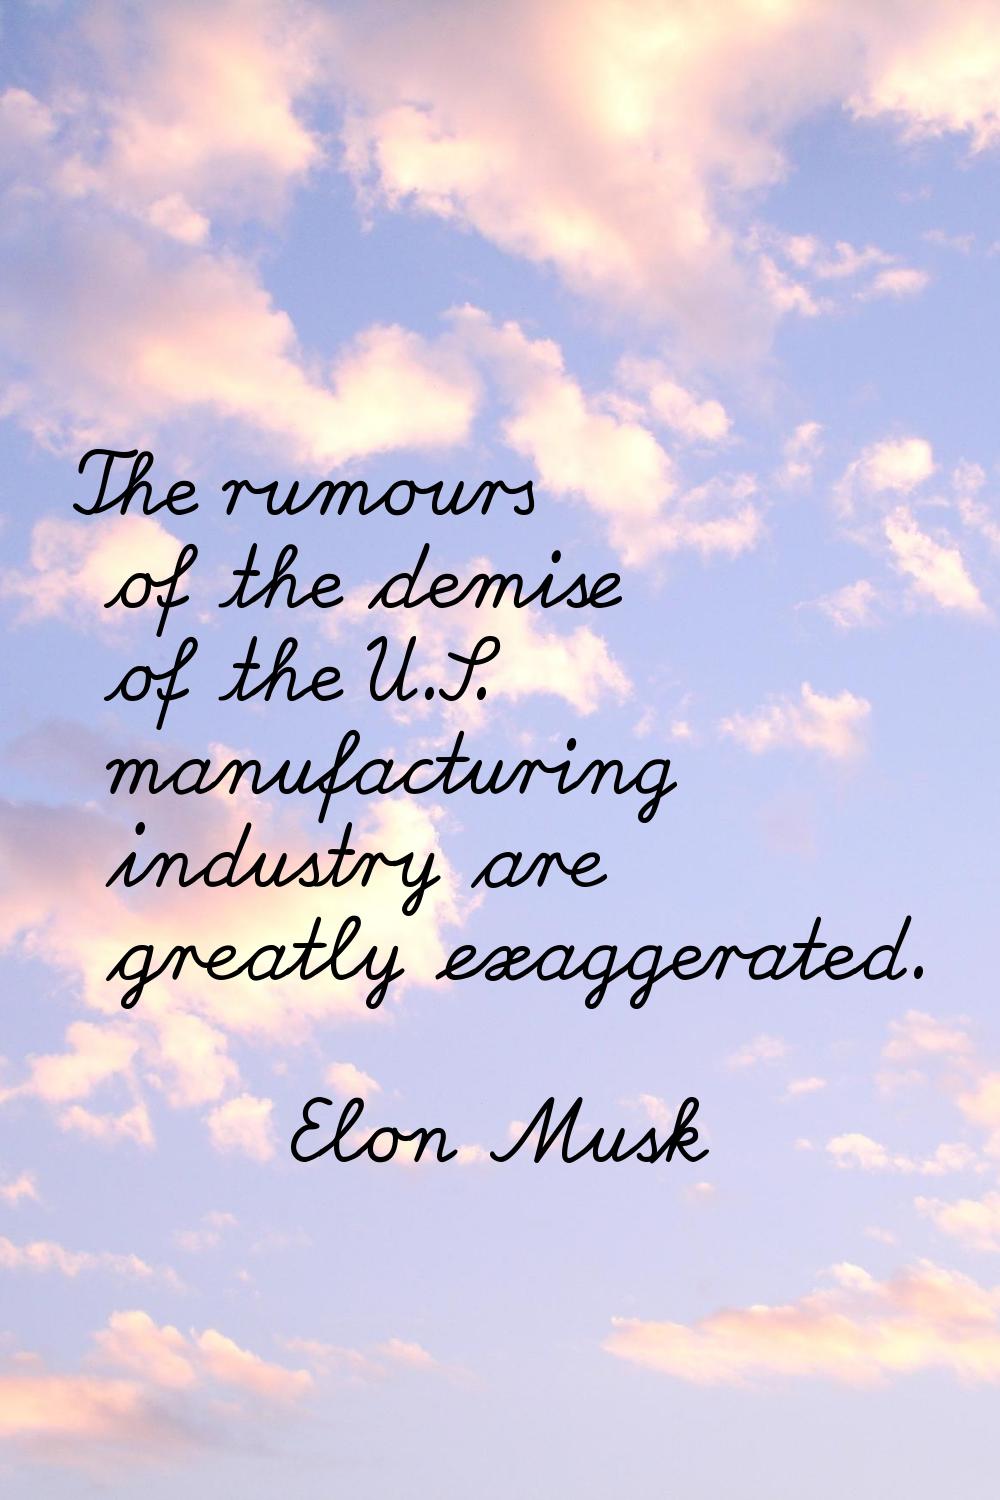 The rumours of the demise of the U.S. manufacturing industry are greatly exaggerated.